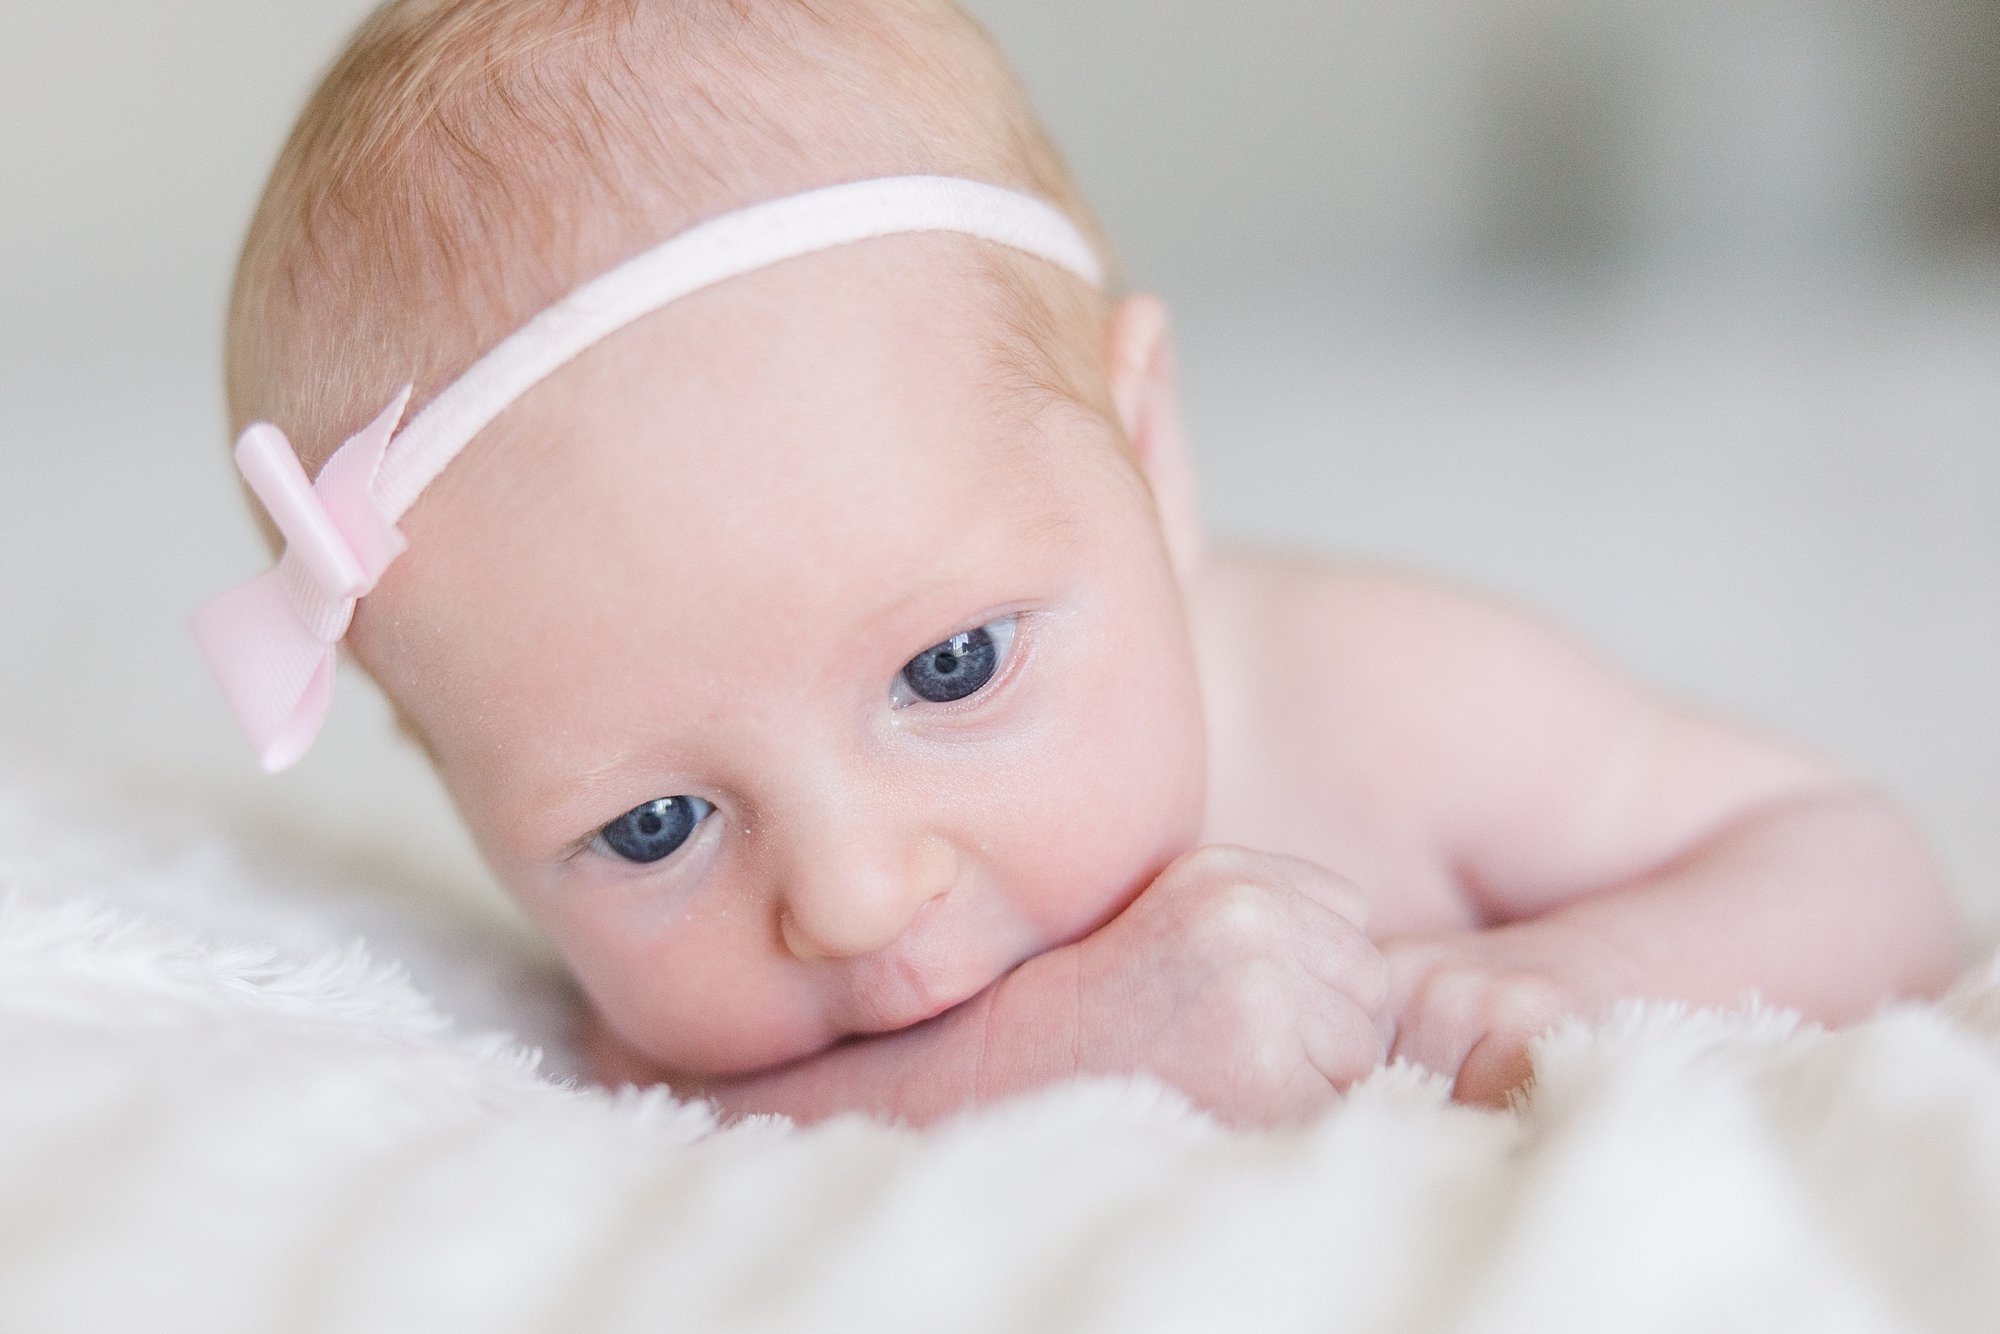 baby girl wearing a pink headband with blue eyes